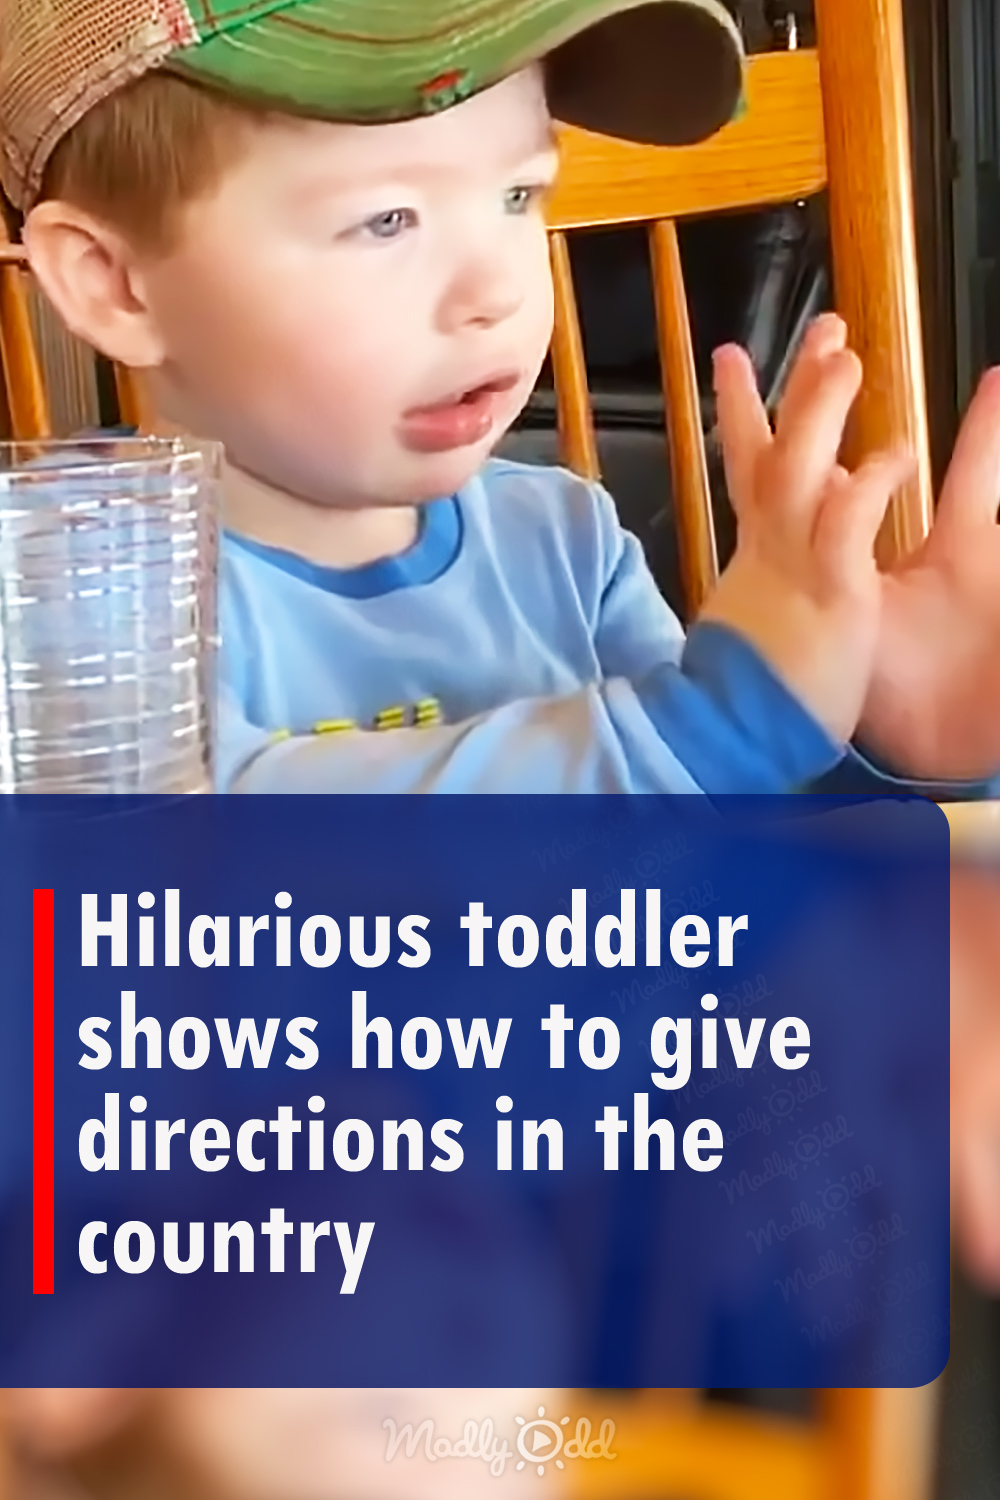 Hilarious toddler shows how to give directions in the country